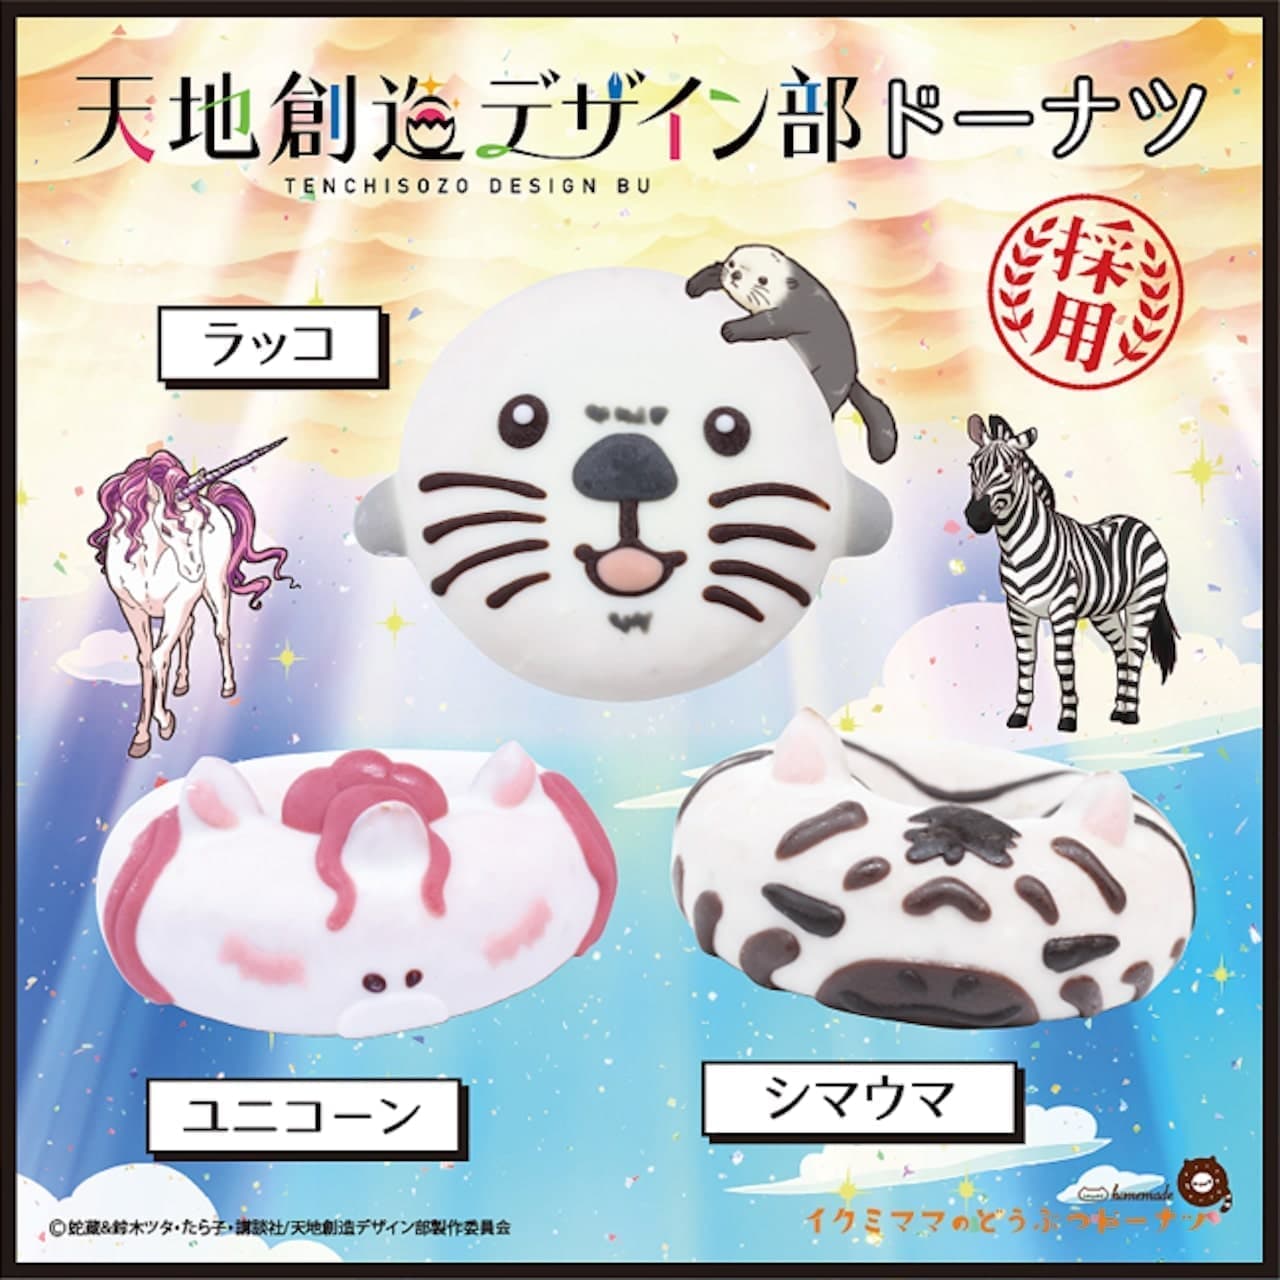 "Heaven's Design Department" Collaboration Donuts From Ikumimama's Animal Donuts